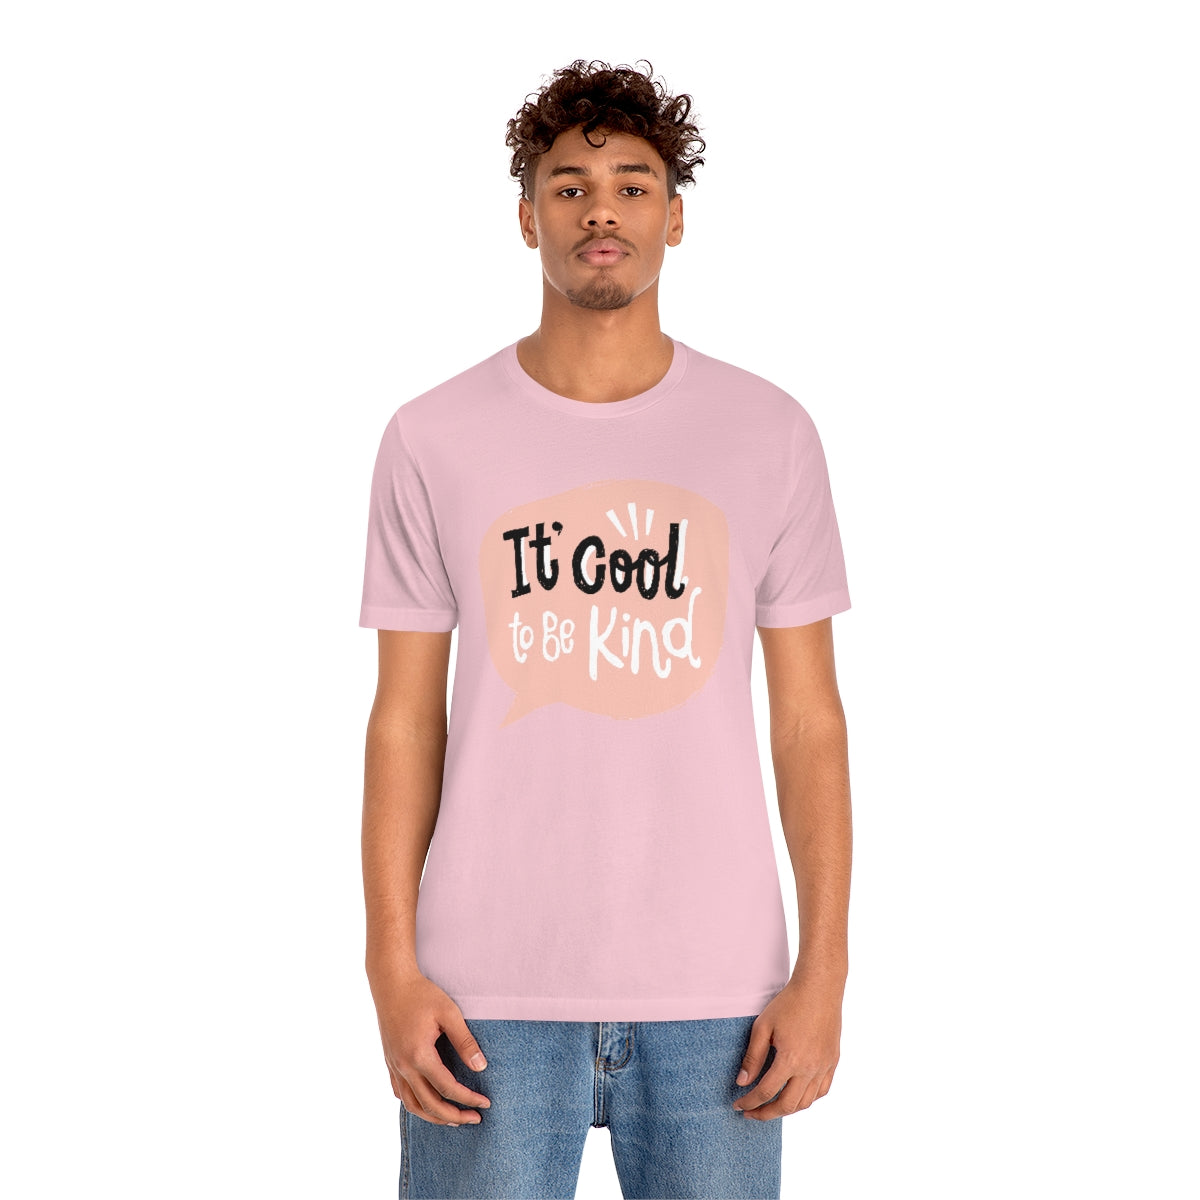 Unisex Jersey Short Sleeve Tee "Pink shirt DAY It's cool to be kind"